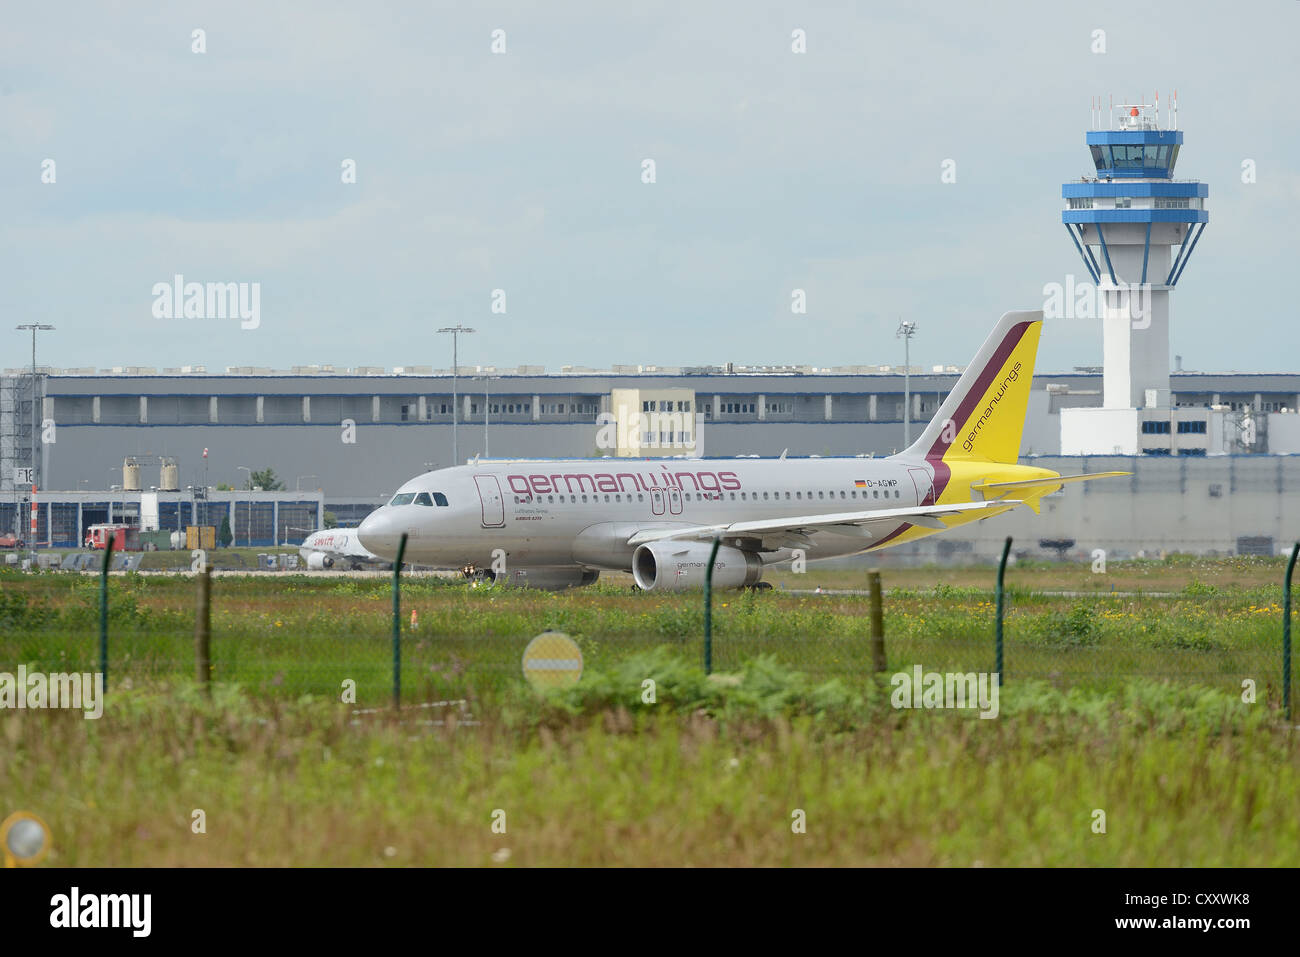 Aircraft of the airline German Wings on the crosswind runway, Cologne Bonn Airport, Cologne, North Rhine-Westphalia Stock Photo